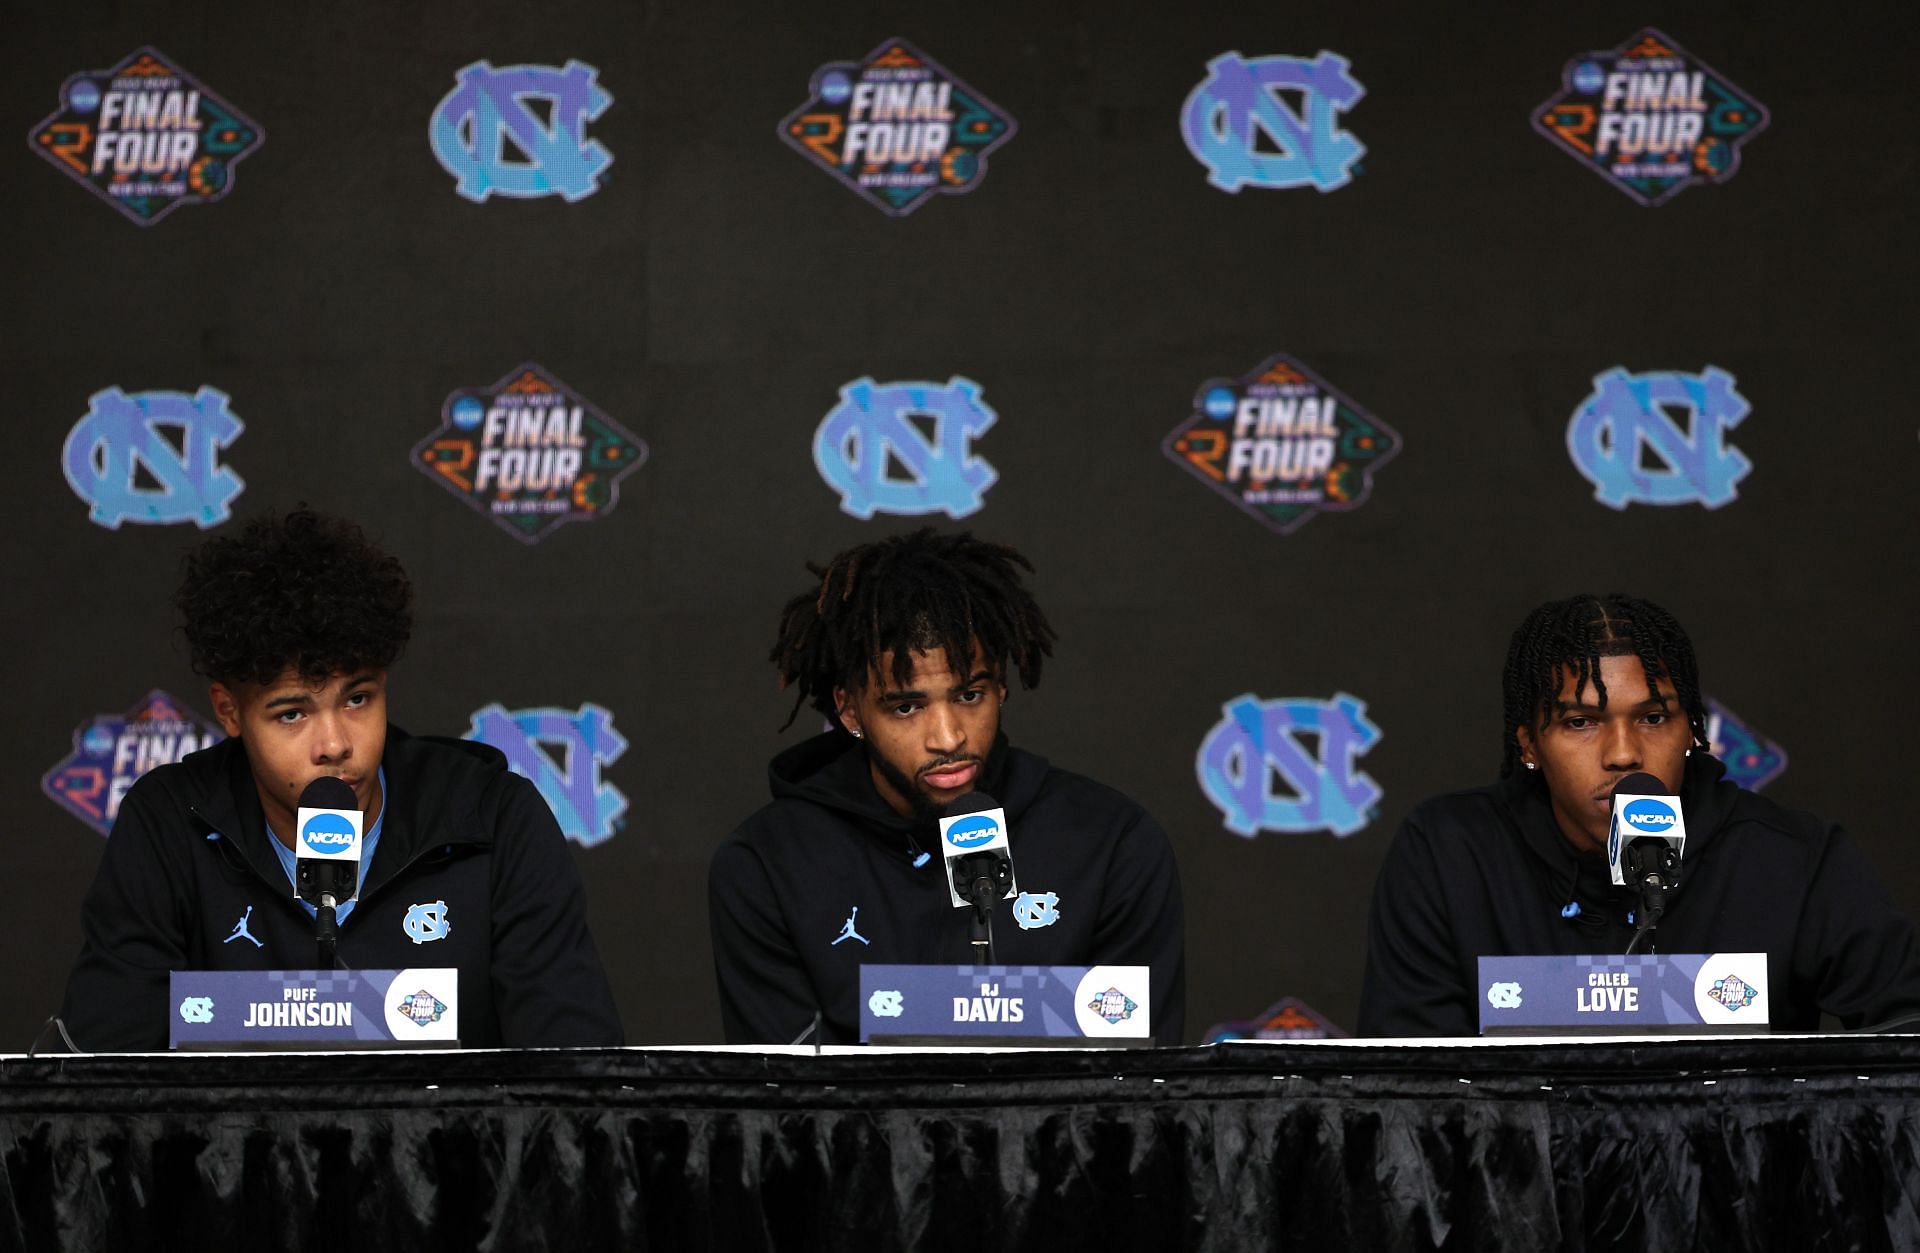 Caleb Love, RJ Davis and Puff Johnson answer questions at the Final Four